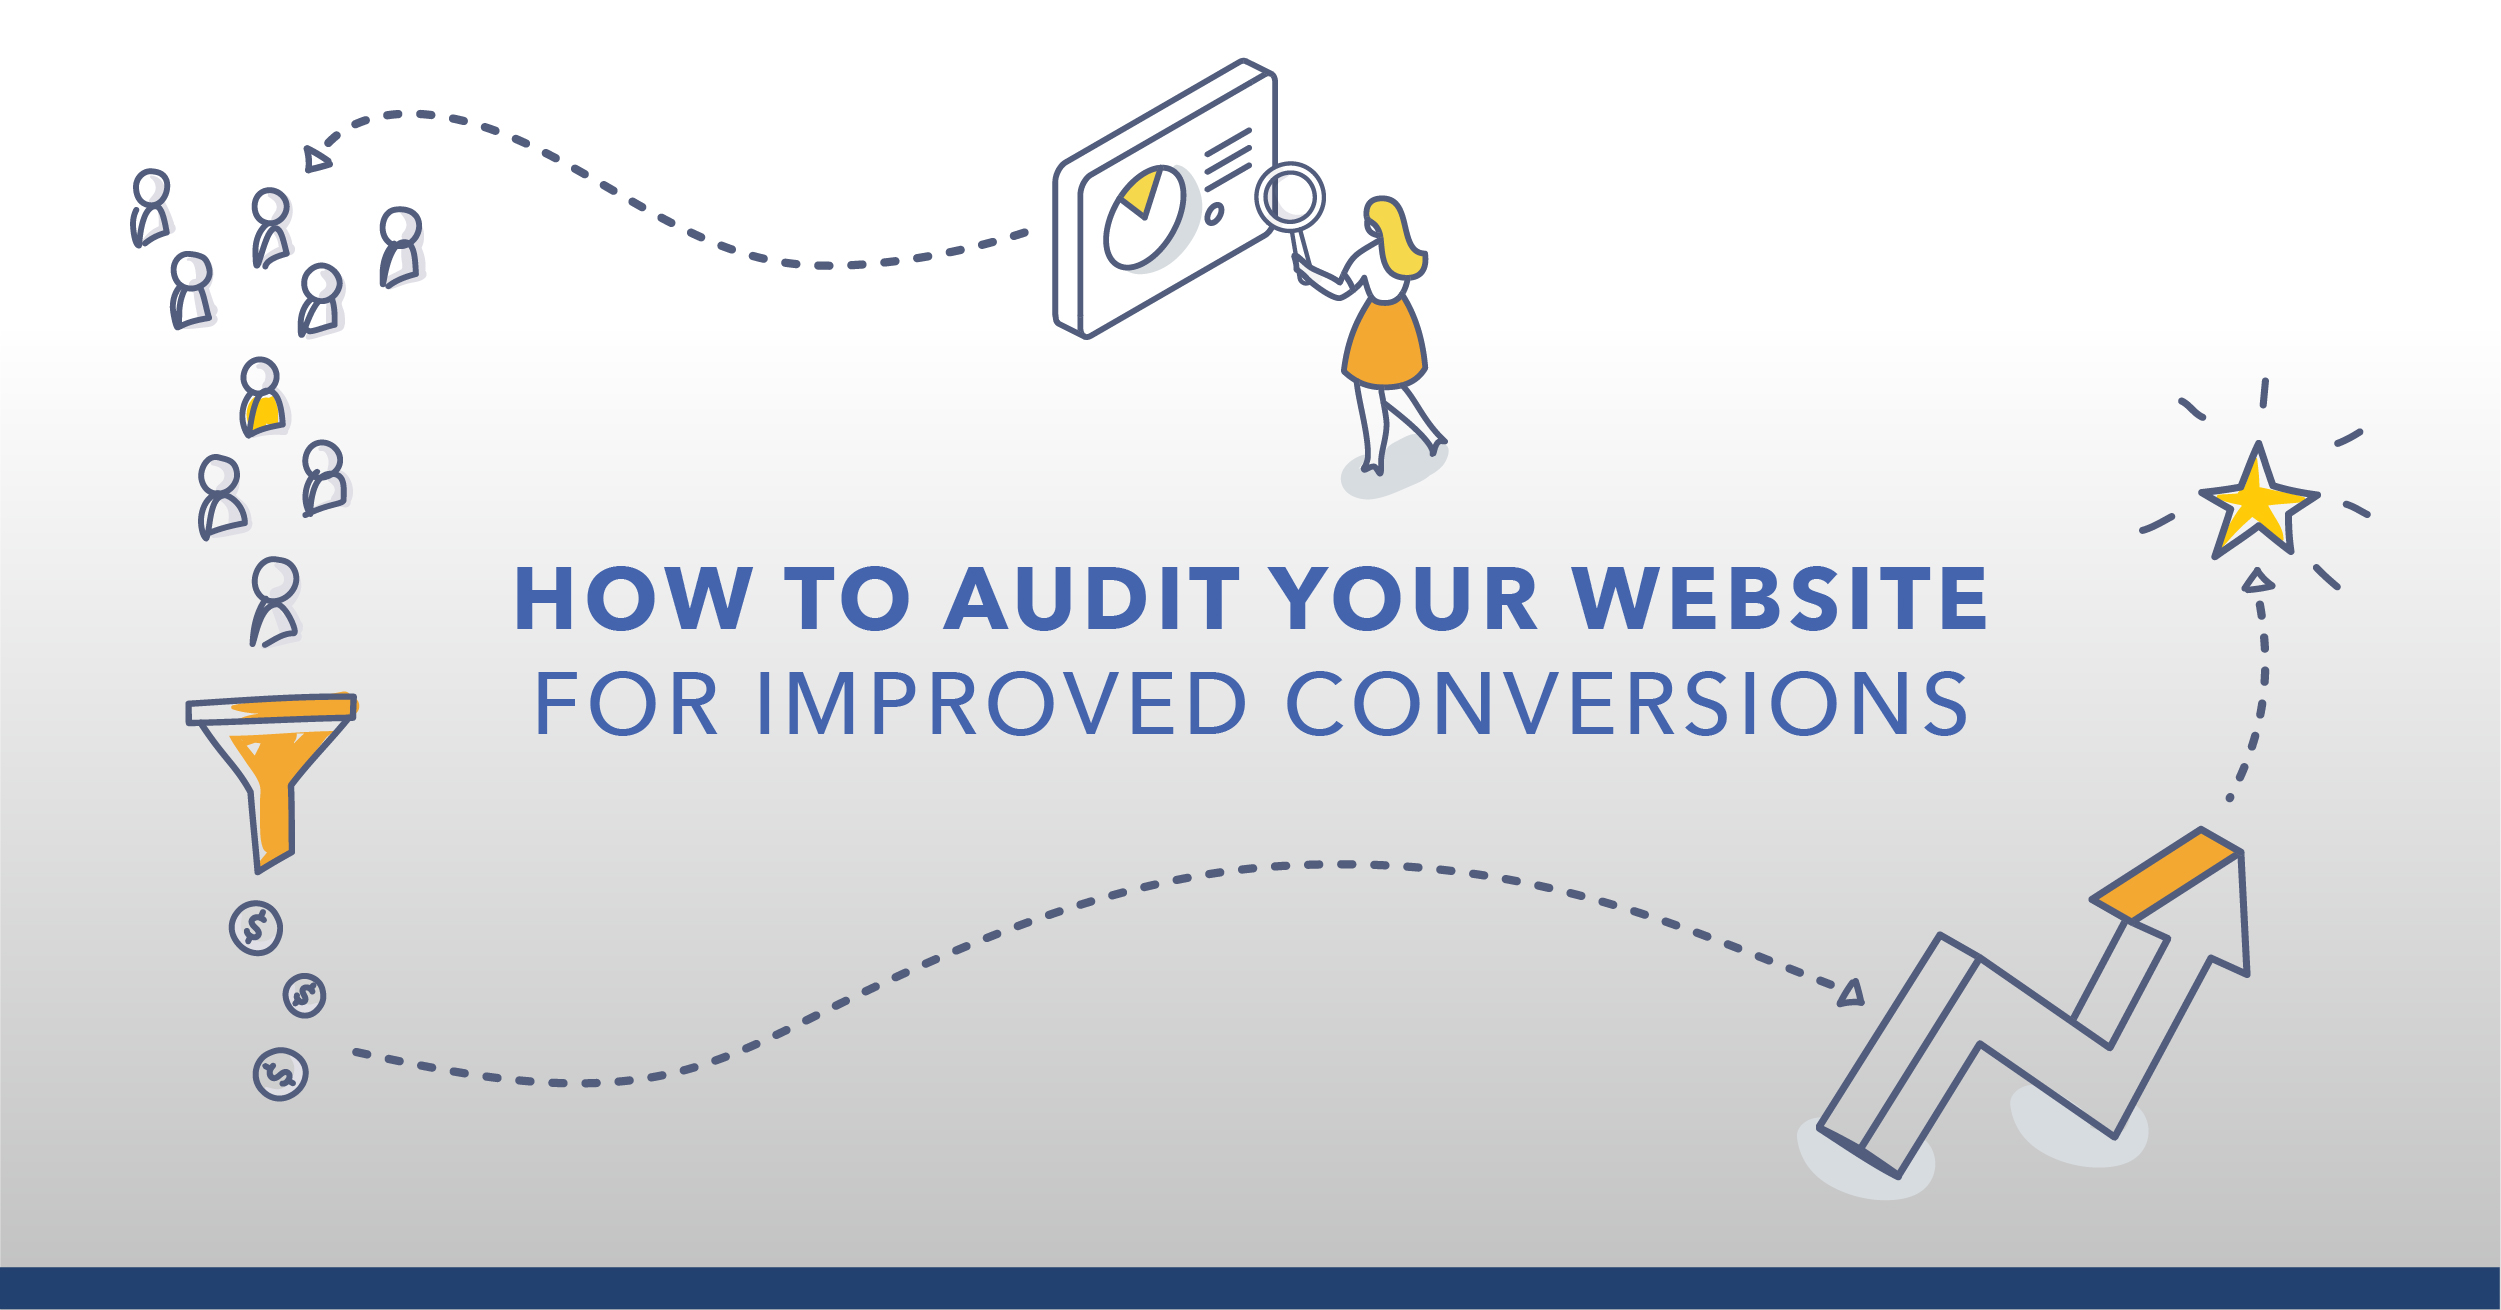 Want Improved Conversions? Try a Website Audit.